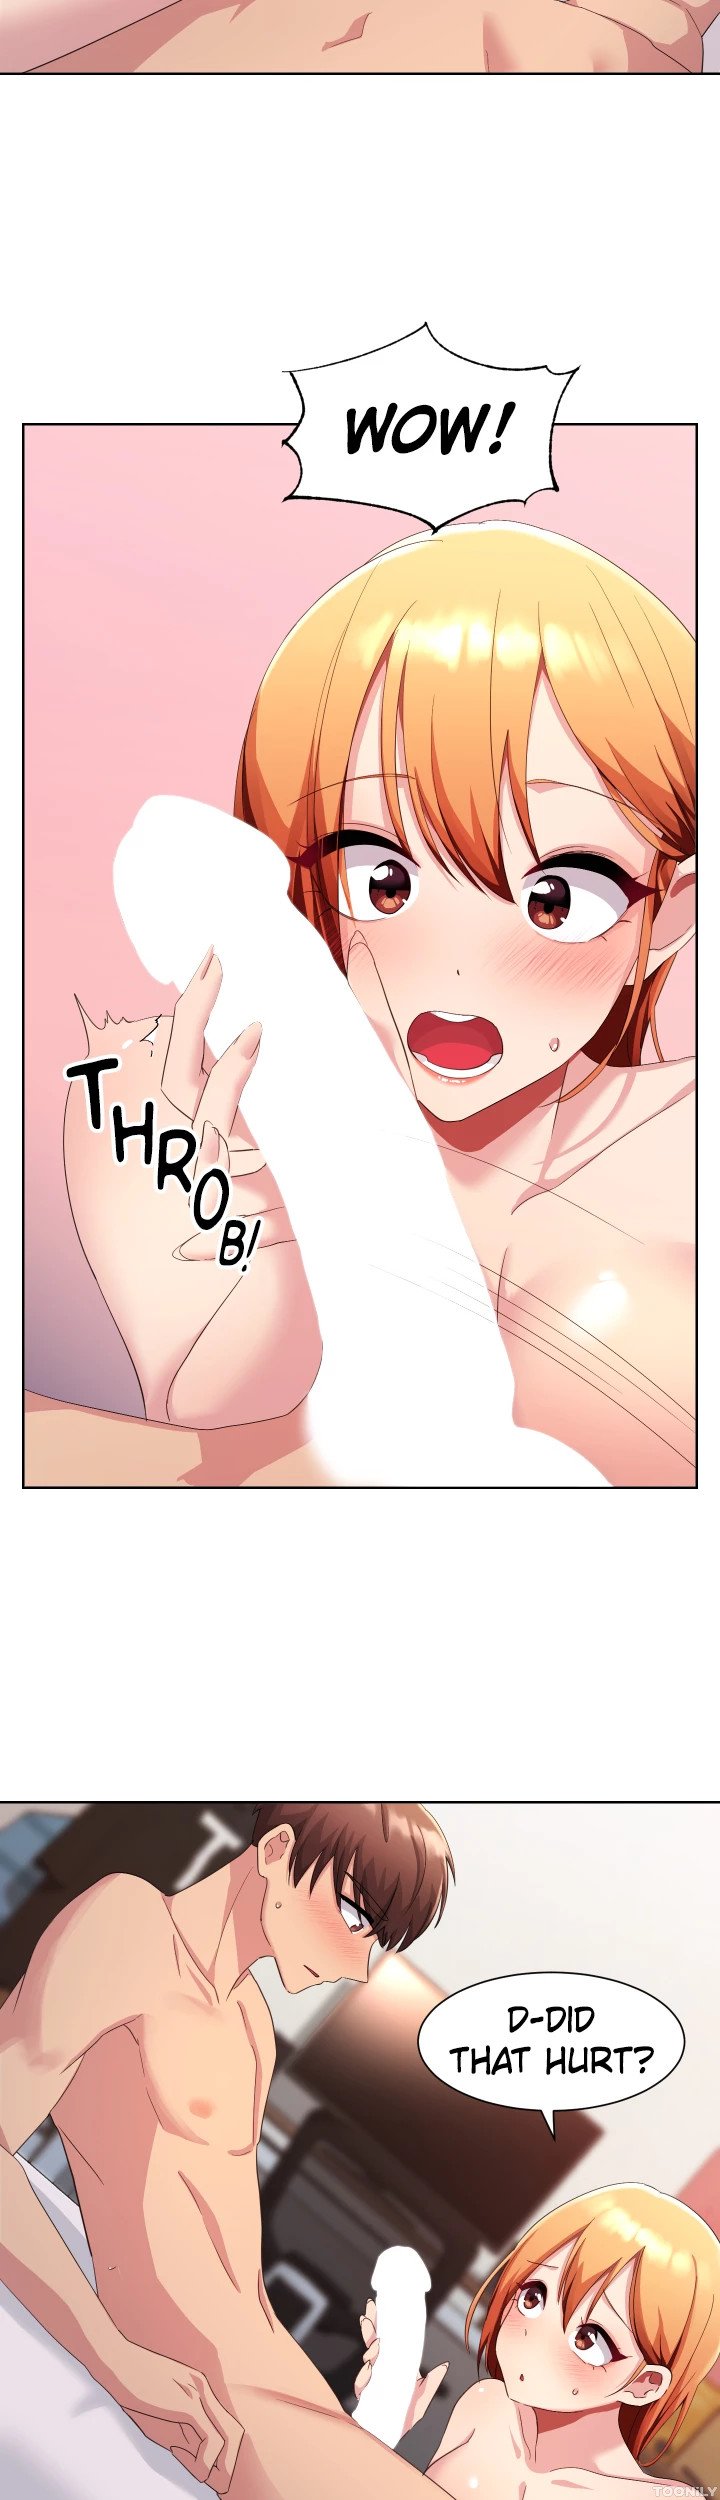 girls-i-used-to-teach-chap-4-19